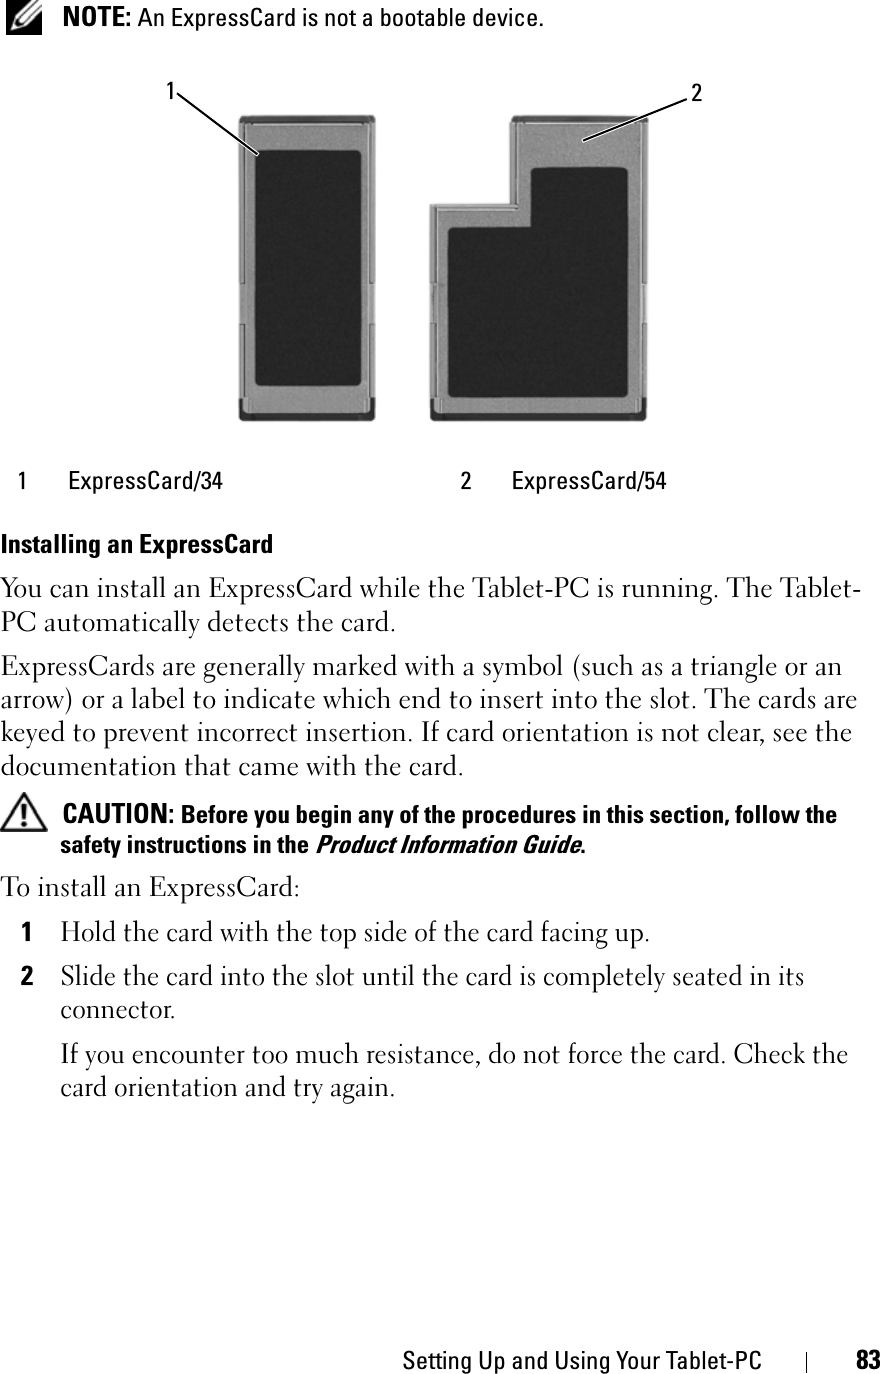 Setting Up and Using Your Tablet-PC 83NOTE: An ExpressCard is not a bootable device.Installing an ExpressCardYou can install an ExpressCard while the Tablet-PC is running. The Tablet-PC automatically detects the card.ExpressCards are generally marked with a symbol (such as a triangle or an arrow) or a label to indicate which end to insert into the slot. The cards are keyed to prevent incorrect insertion. If card orientation is not clear, see the documentation that came with the card. CAUTION: Before you begin any of the procedures in this section, follow the safety instructions in the Product Information Guide.To install an ExpressCard:1Hold the card with the top side of the card facing up.2Slide the card into the slot until the card is completely seated in its connector. If you encounter too much resistance, do not force the card. Check the card orientation and try again.1 ExpressCard/34 2 ExpressCard/5412